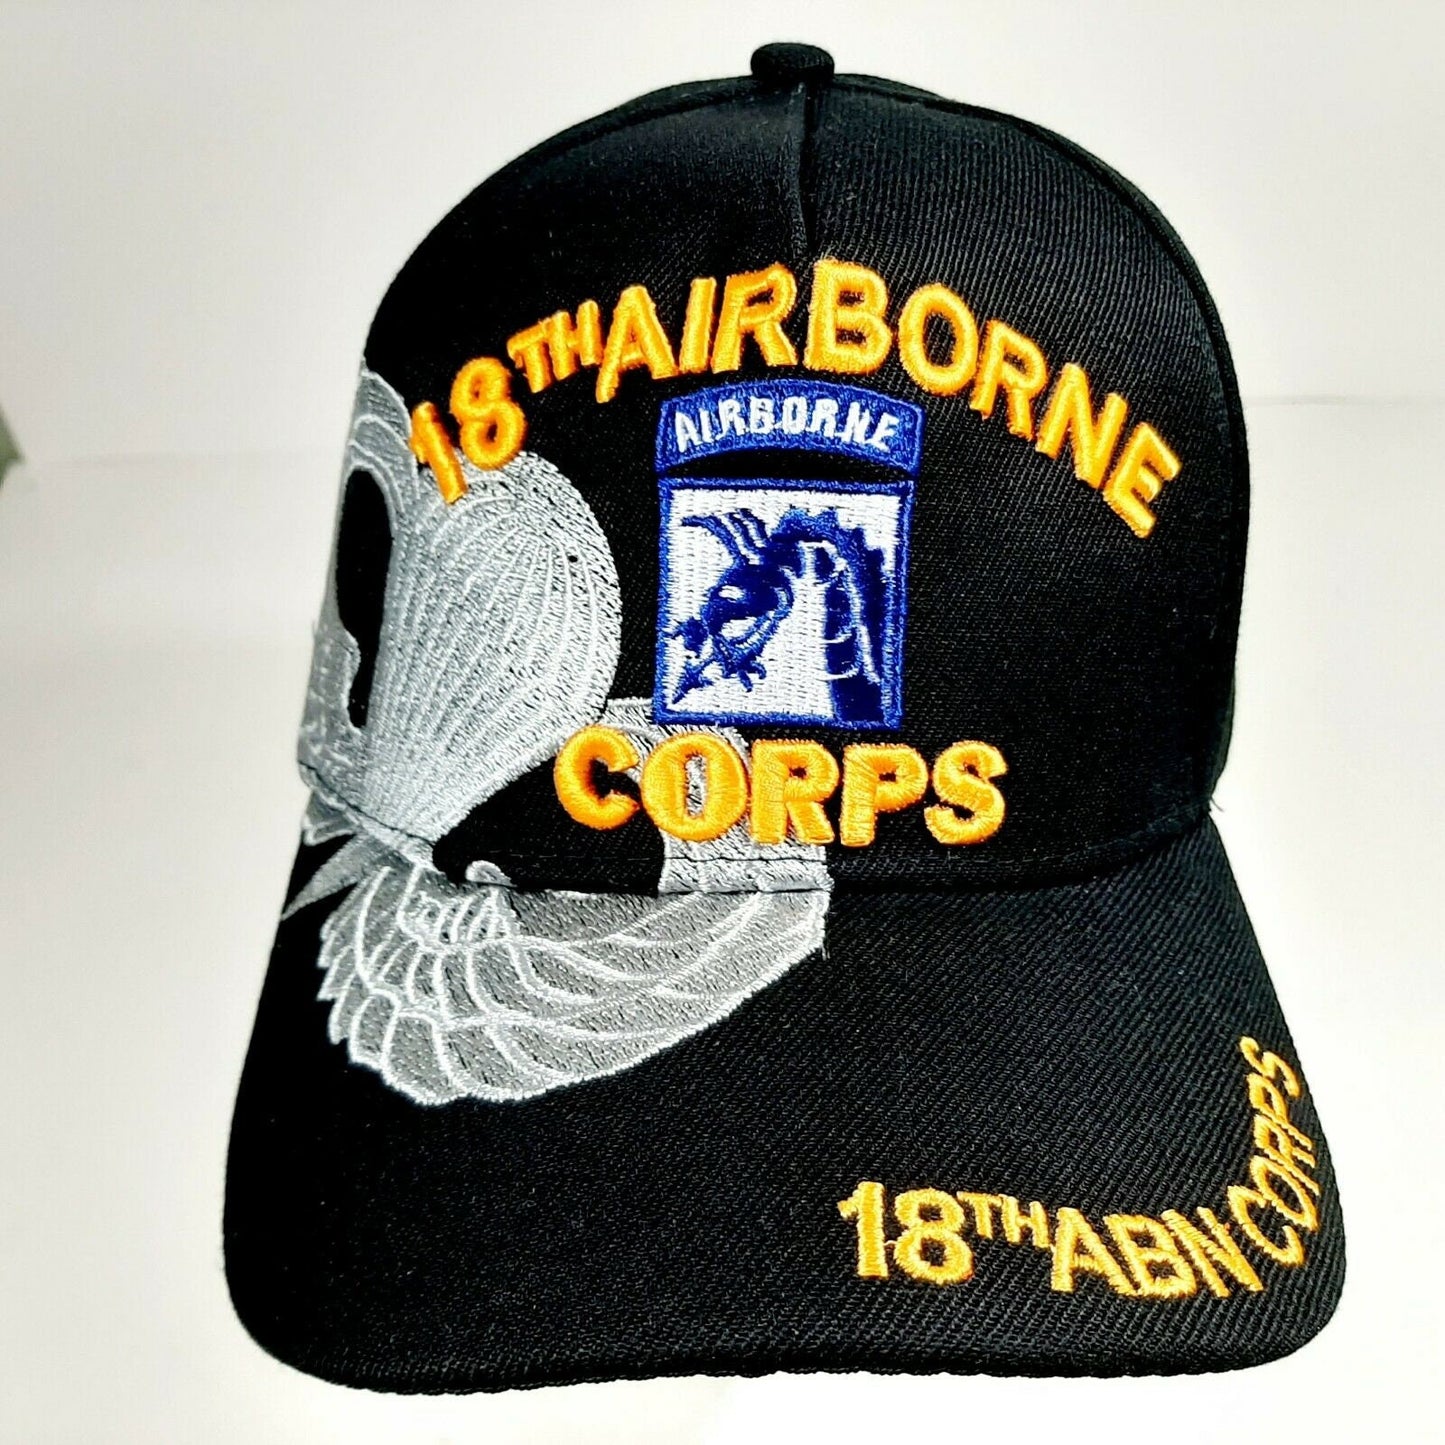 US Army 18th Airborne Corps Men's Ball Cap Hat Black